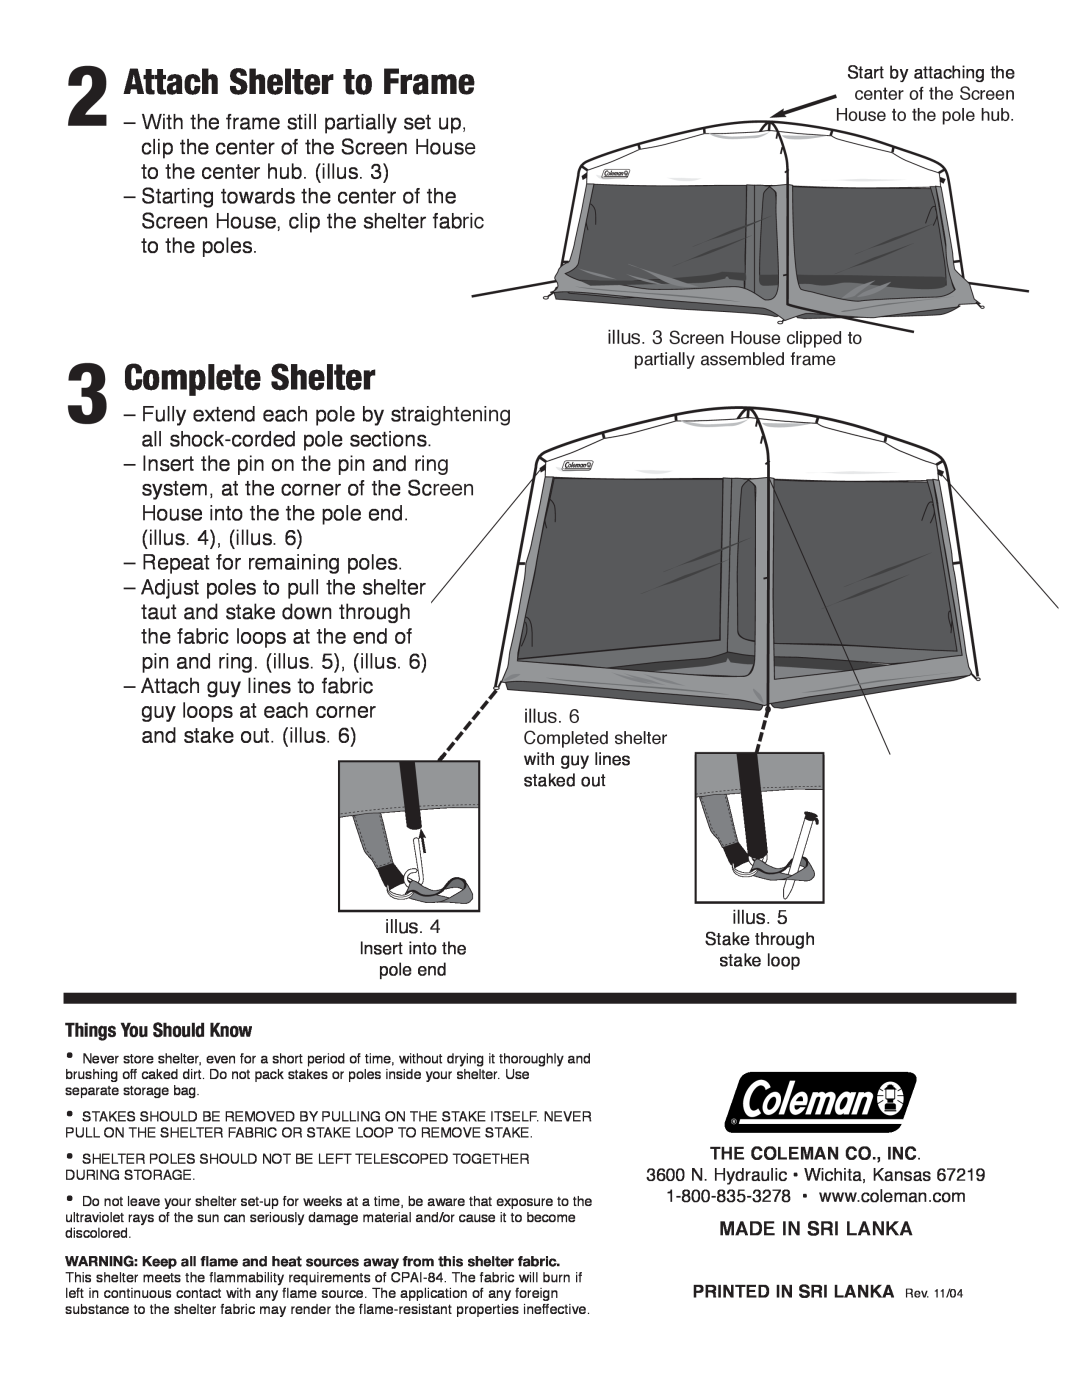 Coleman 9392-522 manual Attach Shelter to Frame, Complete Shelter 